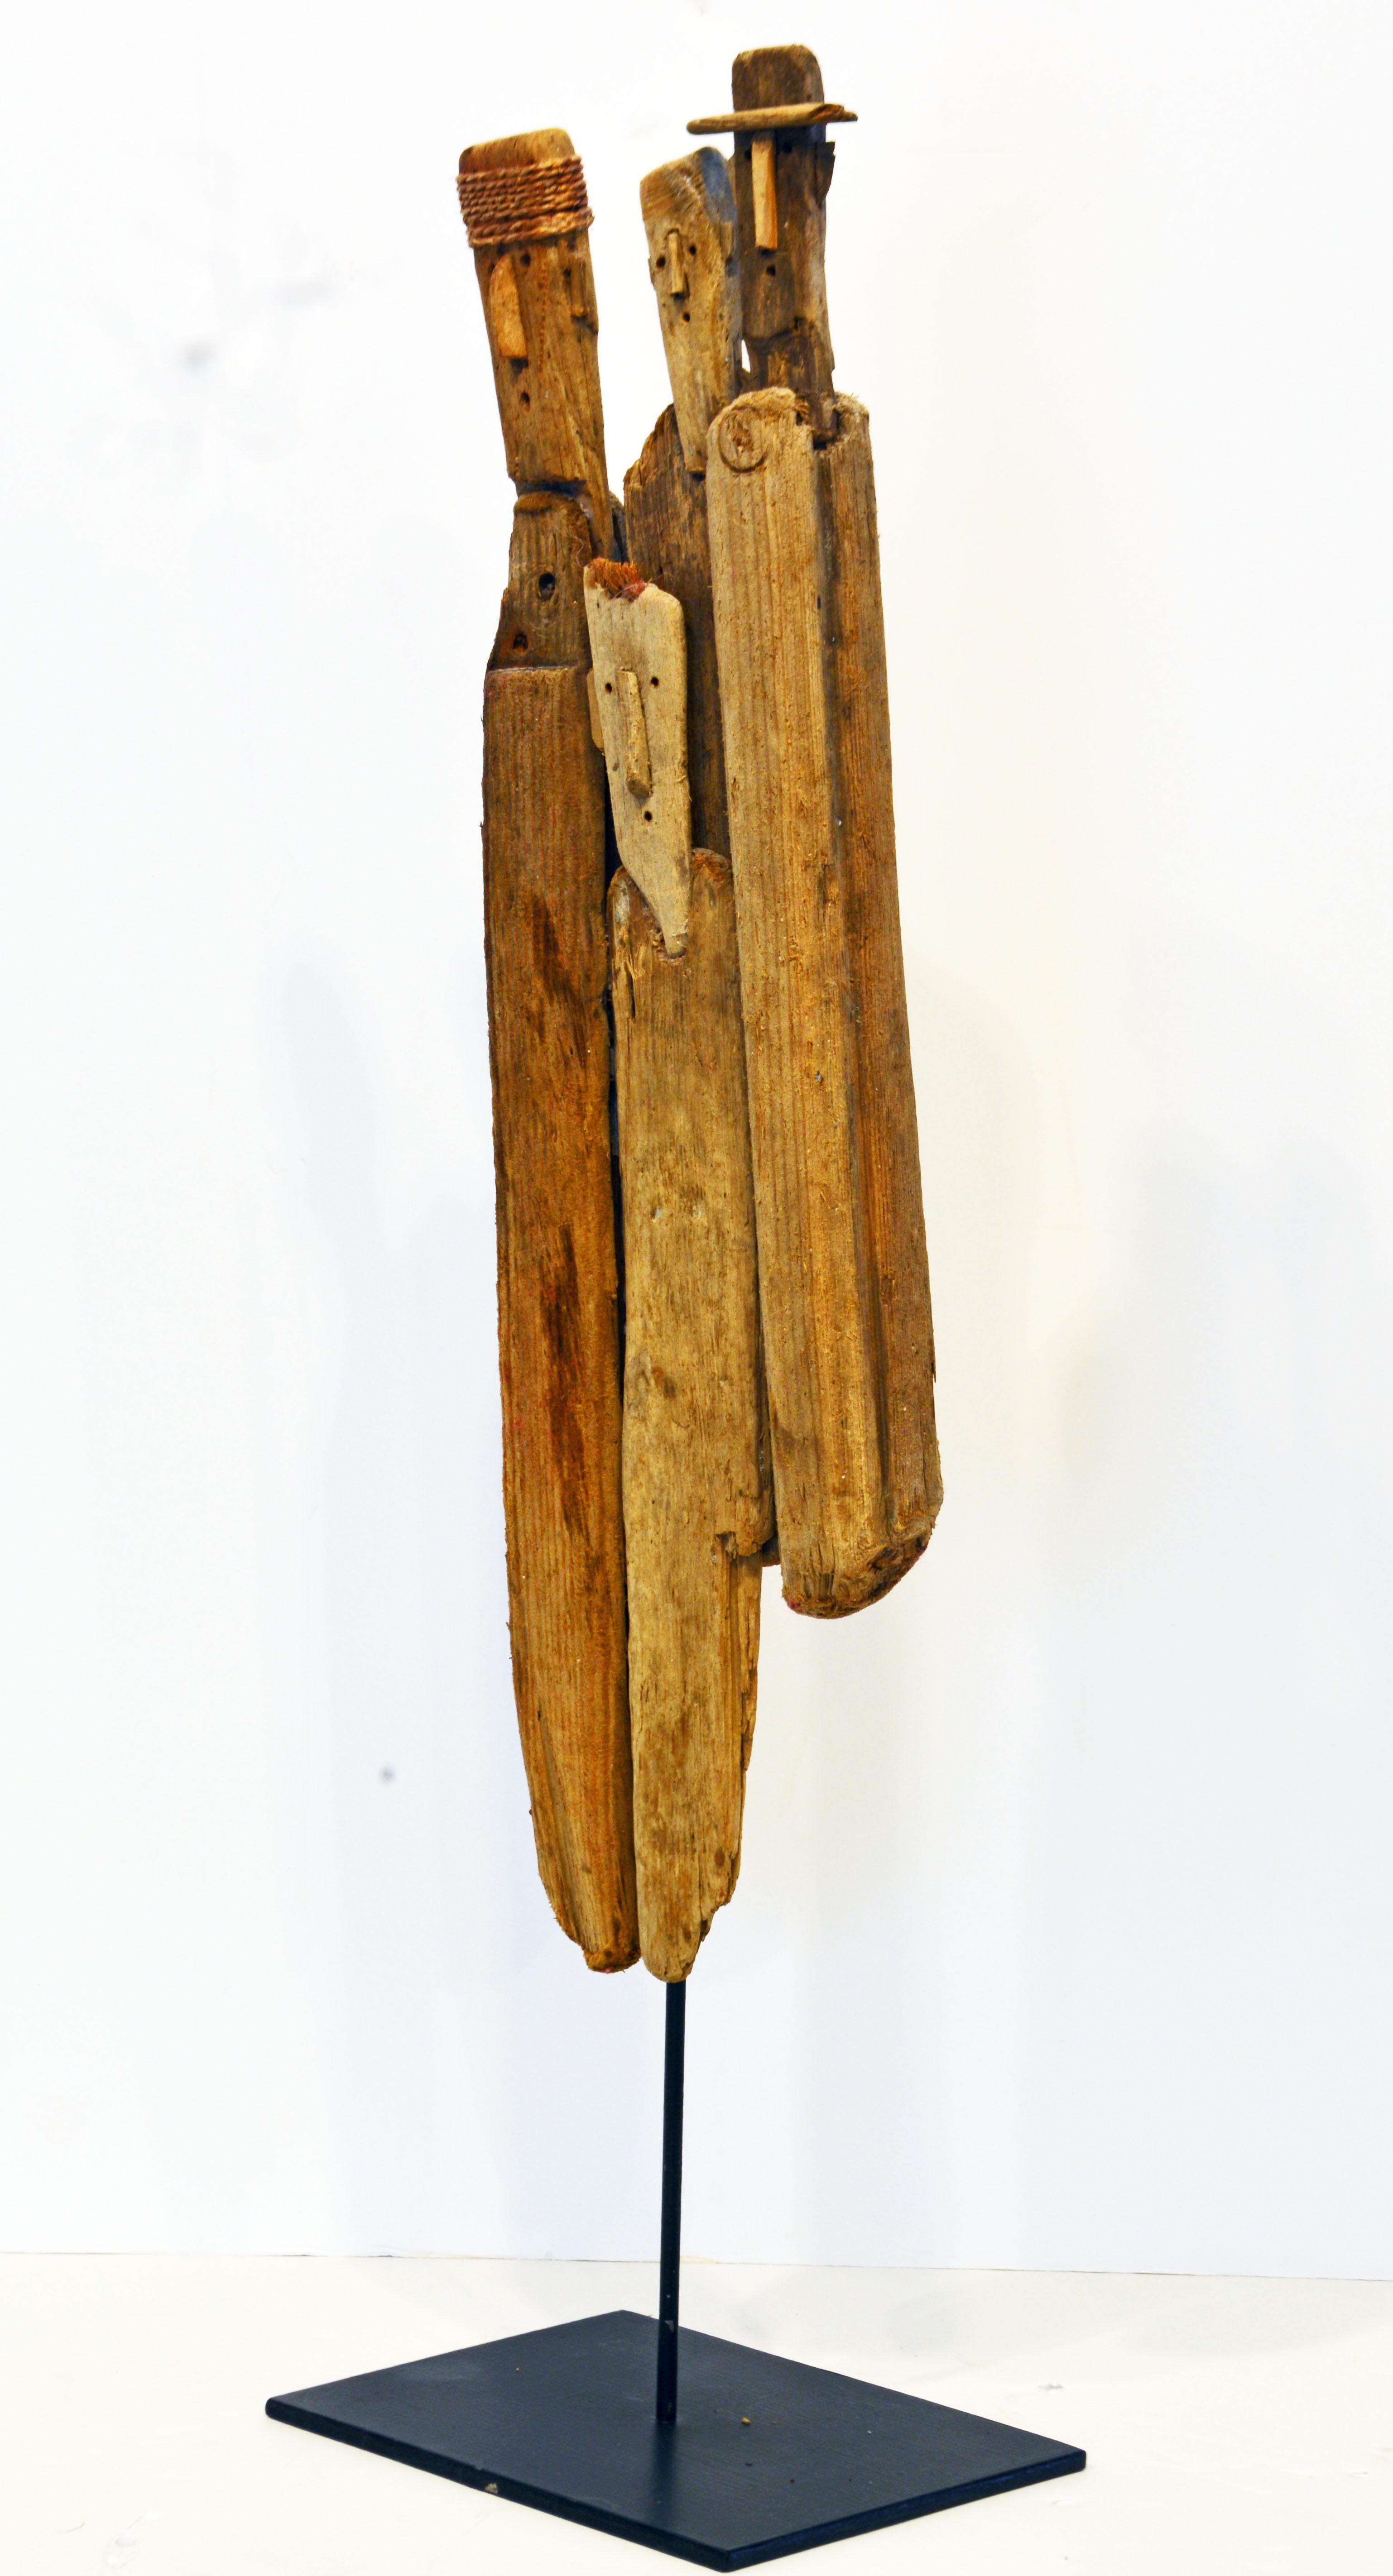 This a wonderful driftwood sculpture or assemblage by Marc Bourlier originally purchased at Galerie Beatrice Soulier in Paris when the gallery had their exhibition 'Small de Marc Bourlier'. I represents four figures each of them personalized by